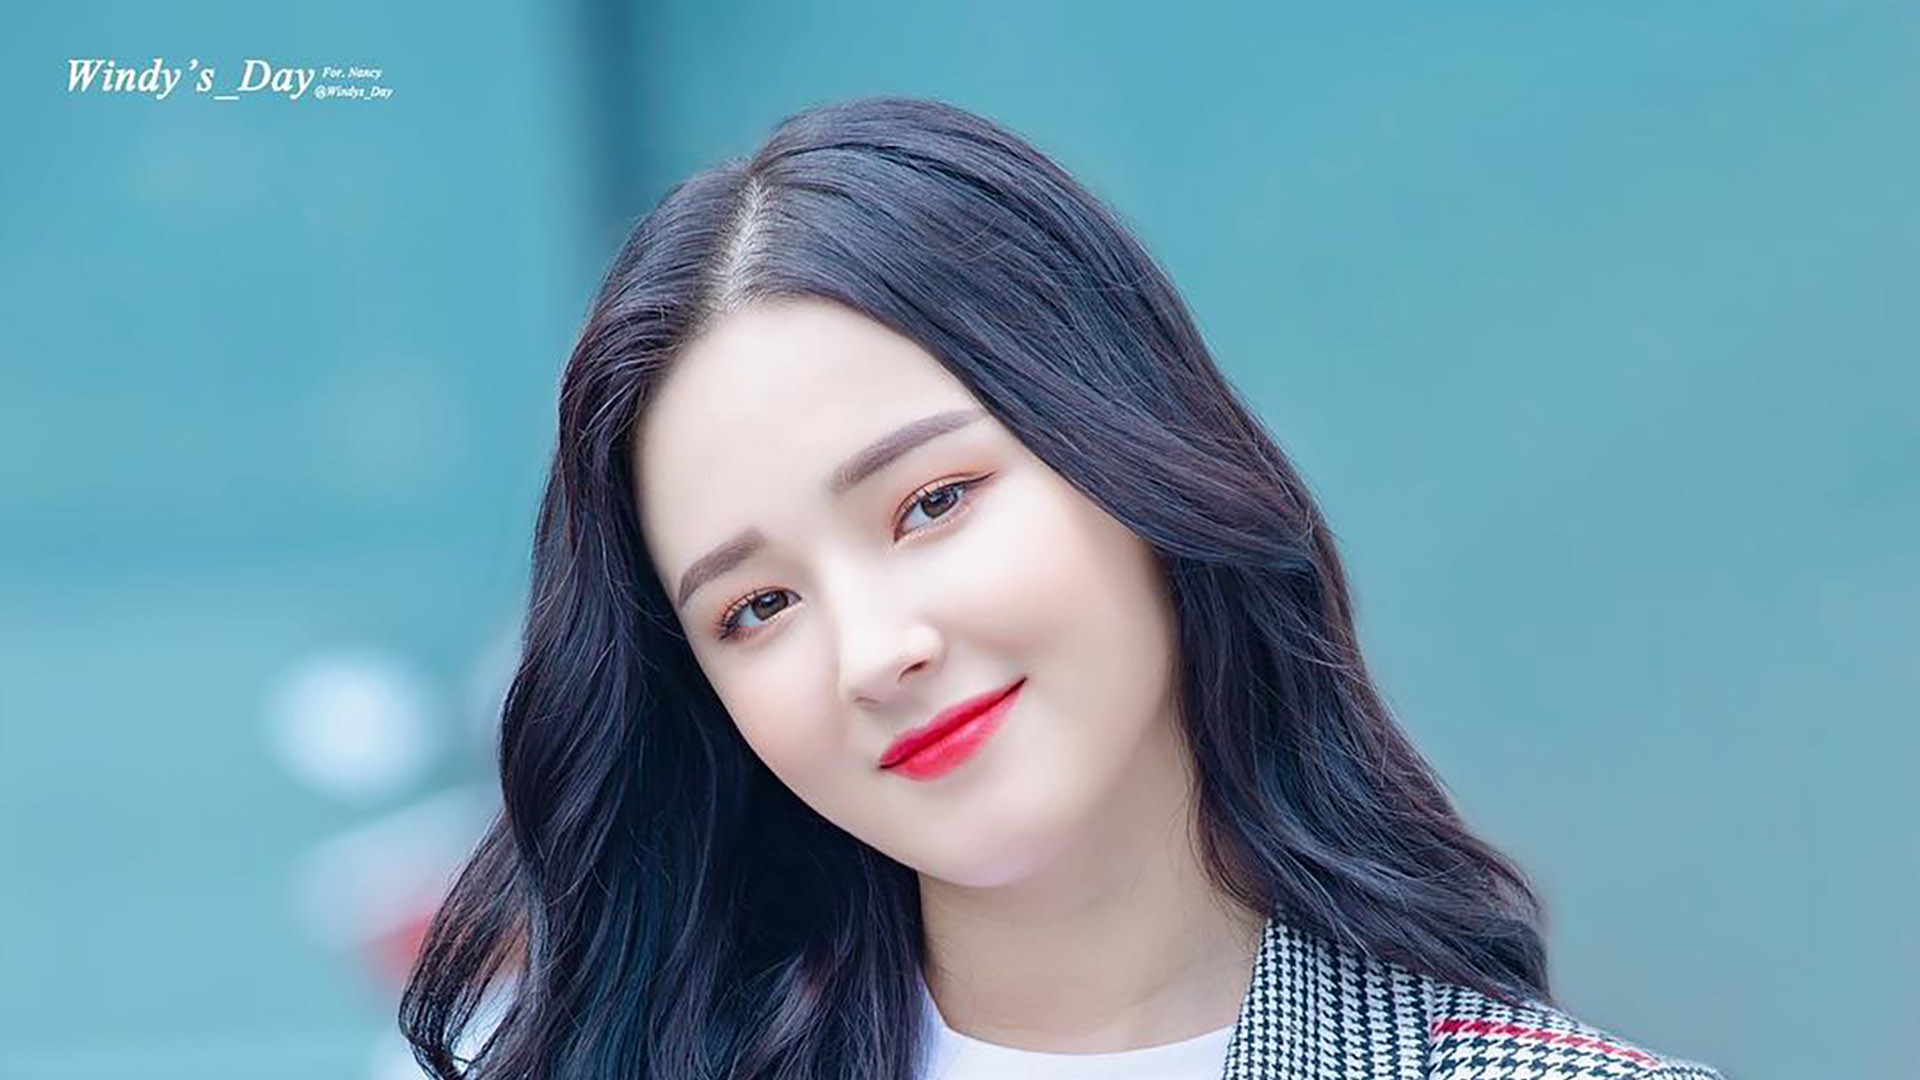 Nancy Momoland Background Wallpapers.